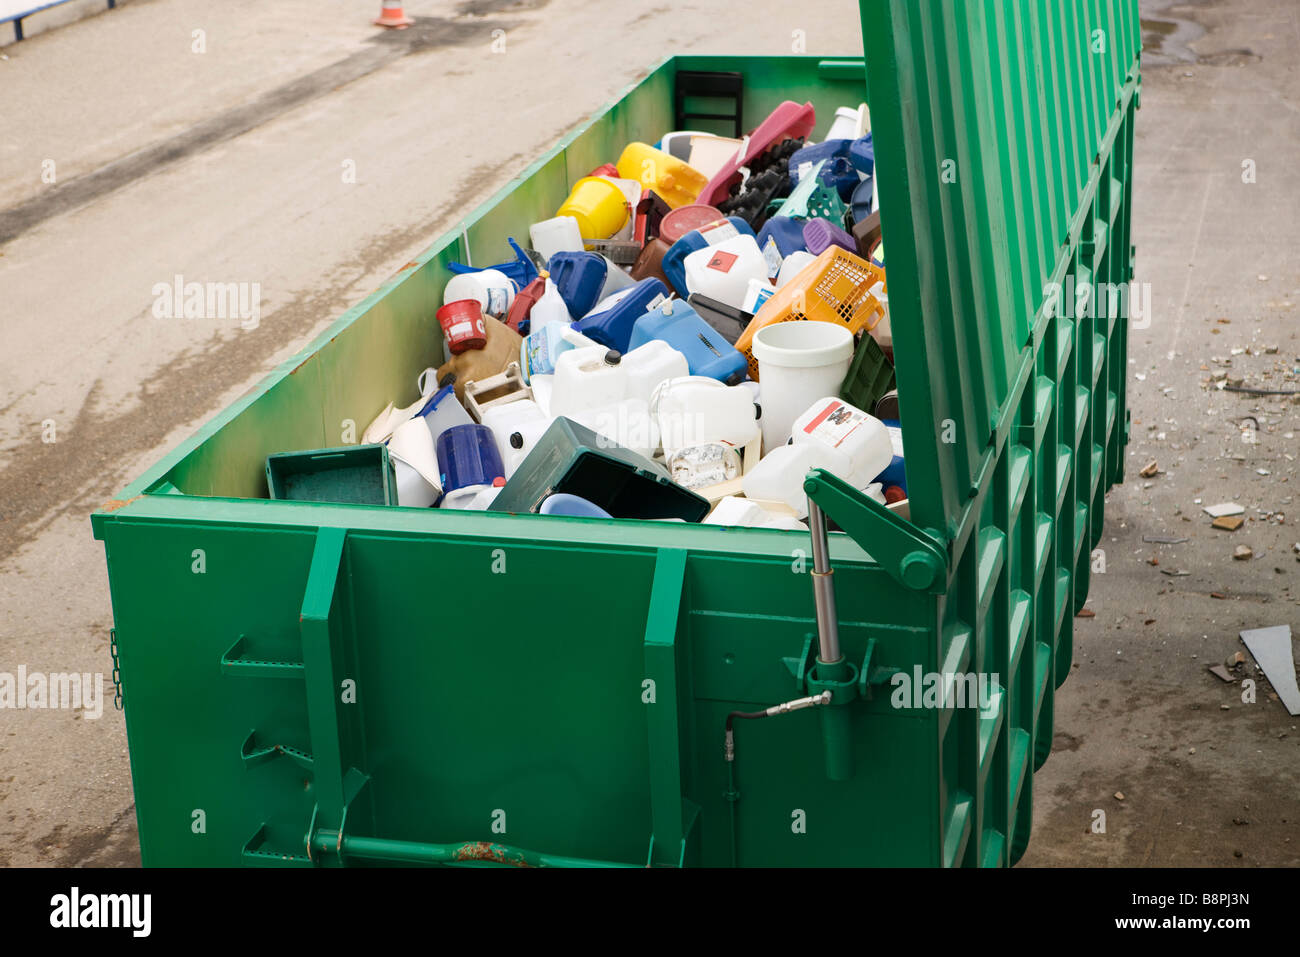 Large recycling bin full of discarded plastic containers Stock Photo